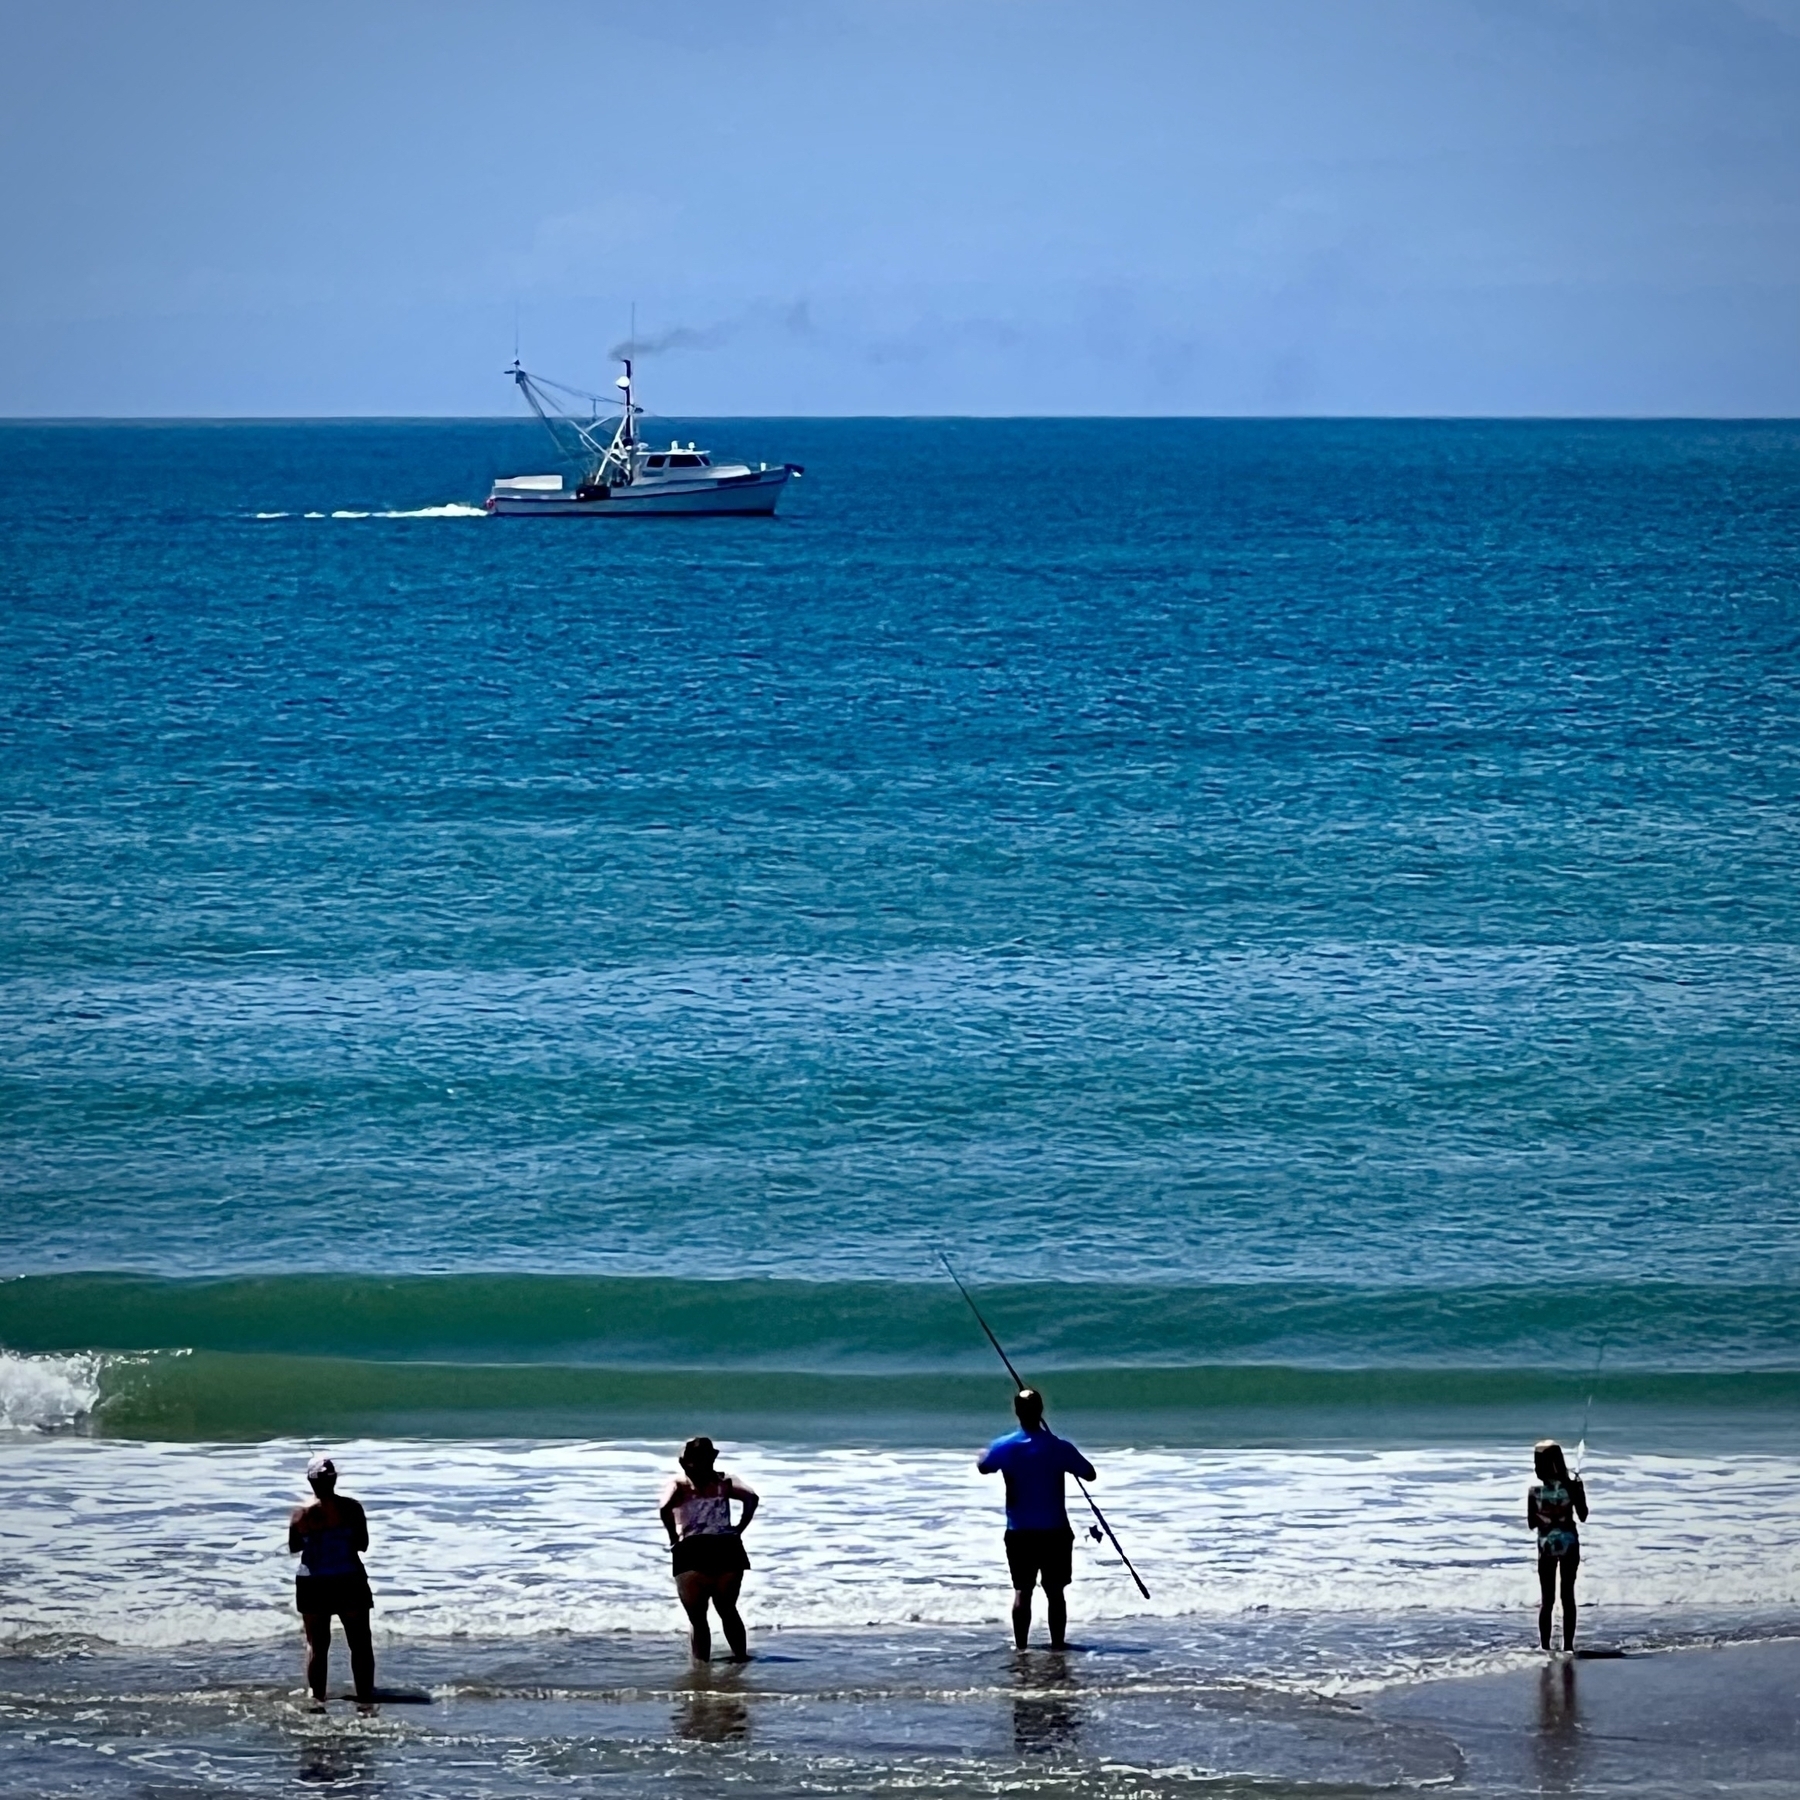 Distant image of four people standing in the surf of a beach. The water is blue and green with visible white foam. In the distance a fishing boat can be seen. 